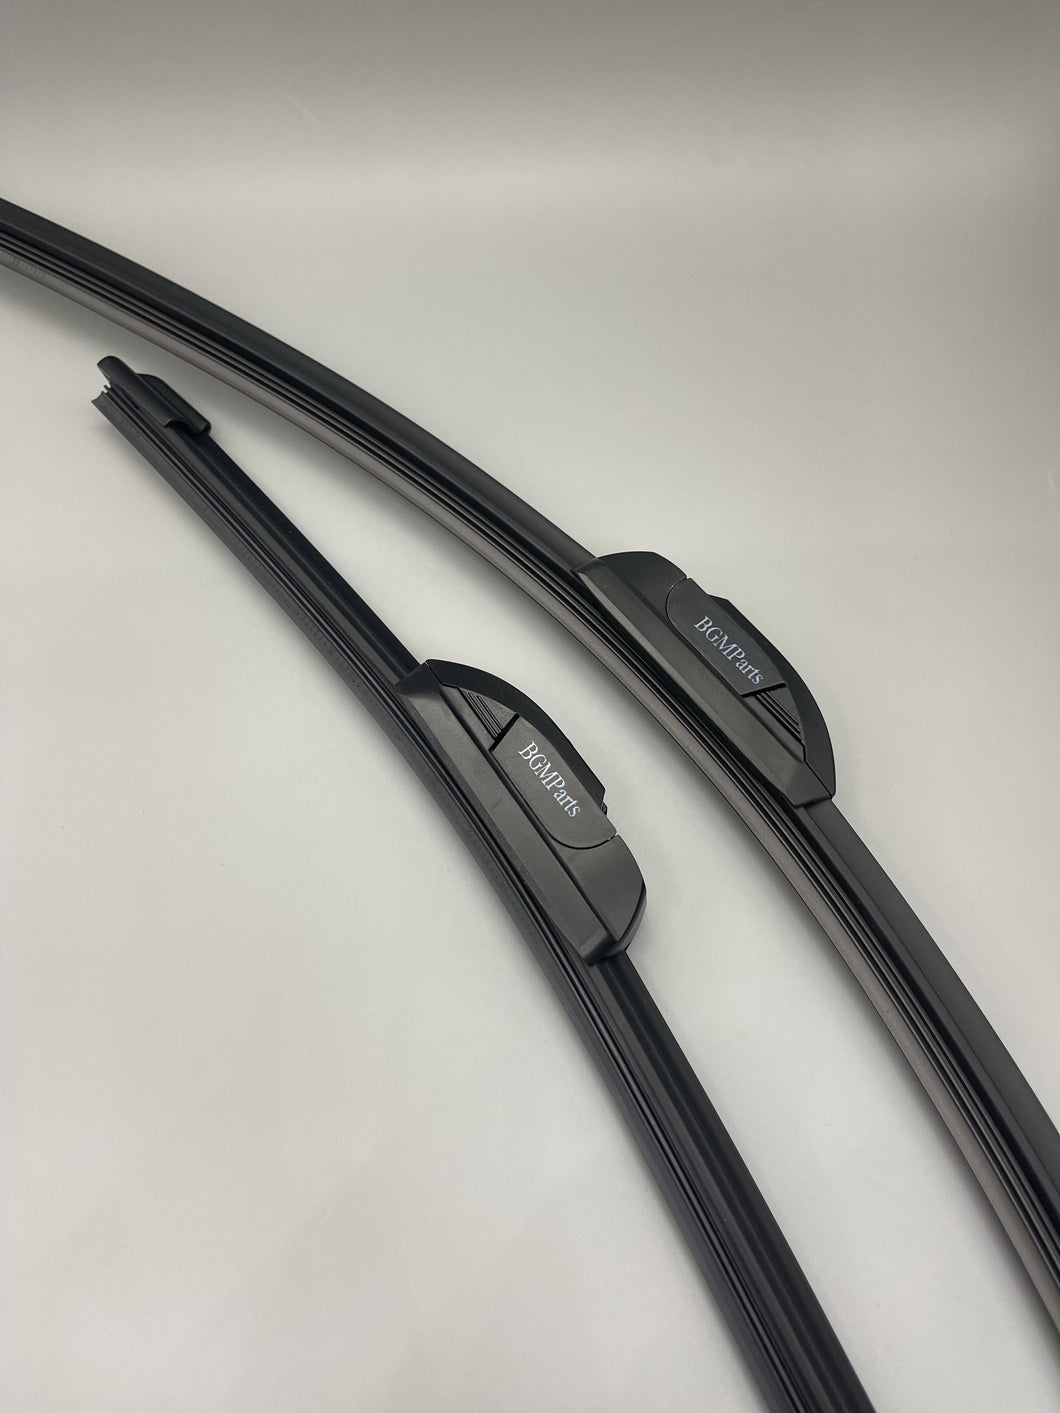 BGMParts Windscreen wipers for motor cars ,Windshield Wipers,RockyParts Type-G 26